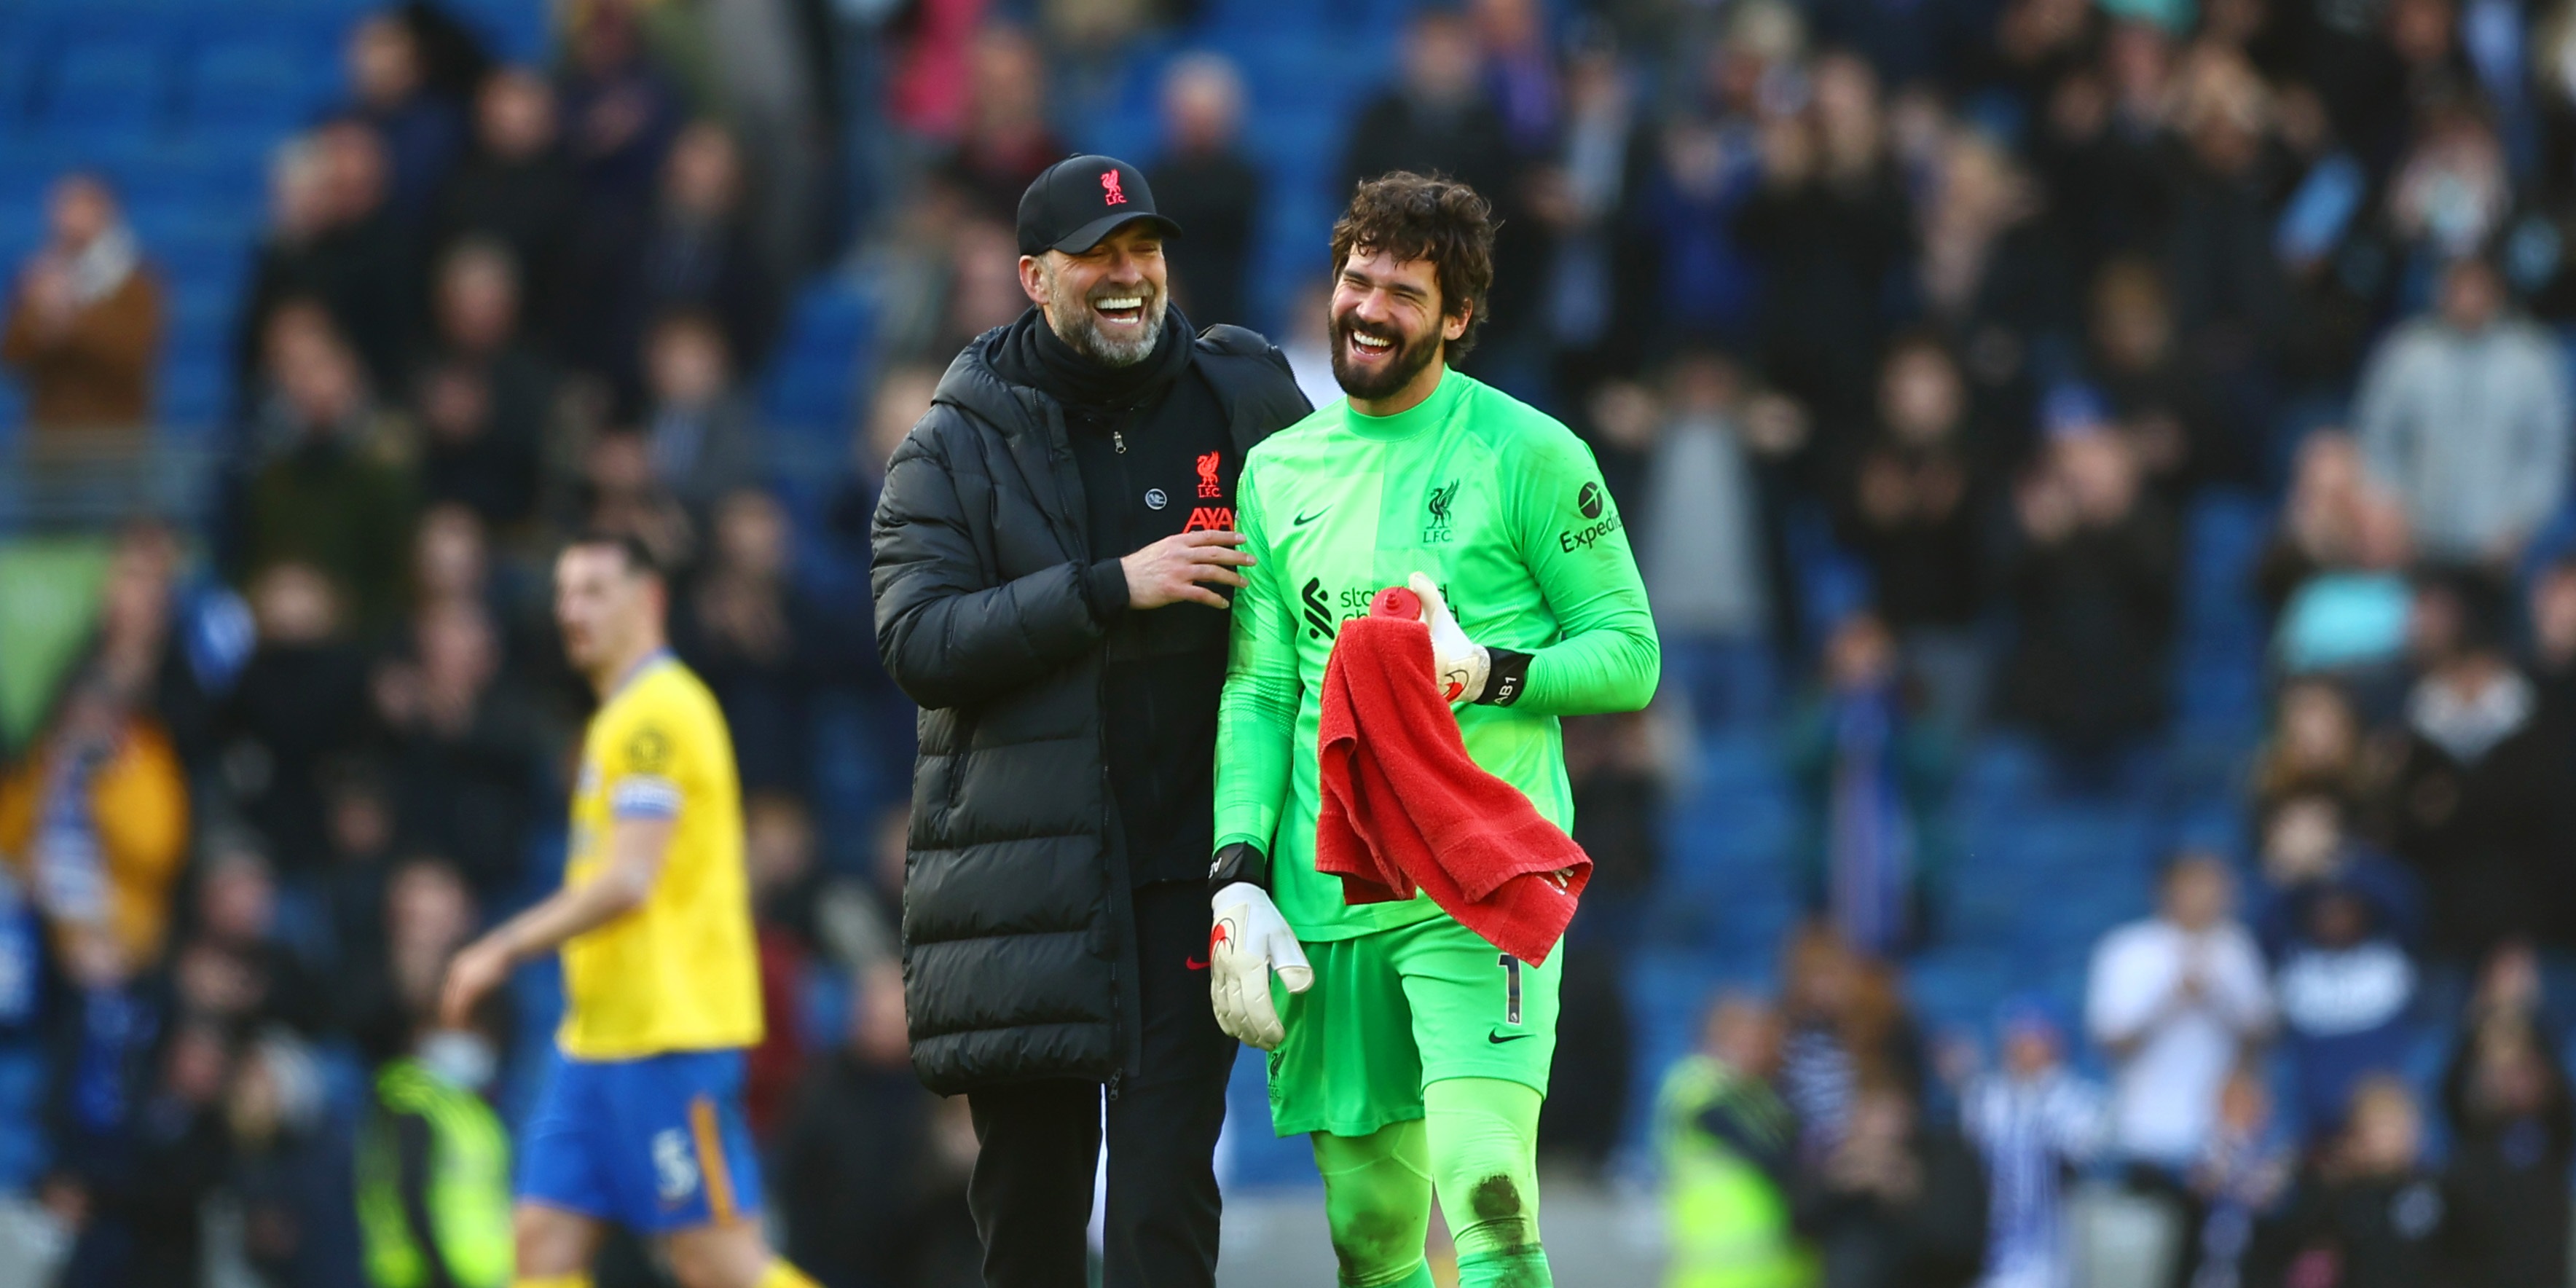 ‘What I like’ – Jonathan Woodgate admits his admiration for Alisson Becker and praises the Brazilian’s attitude